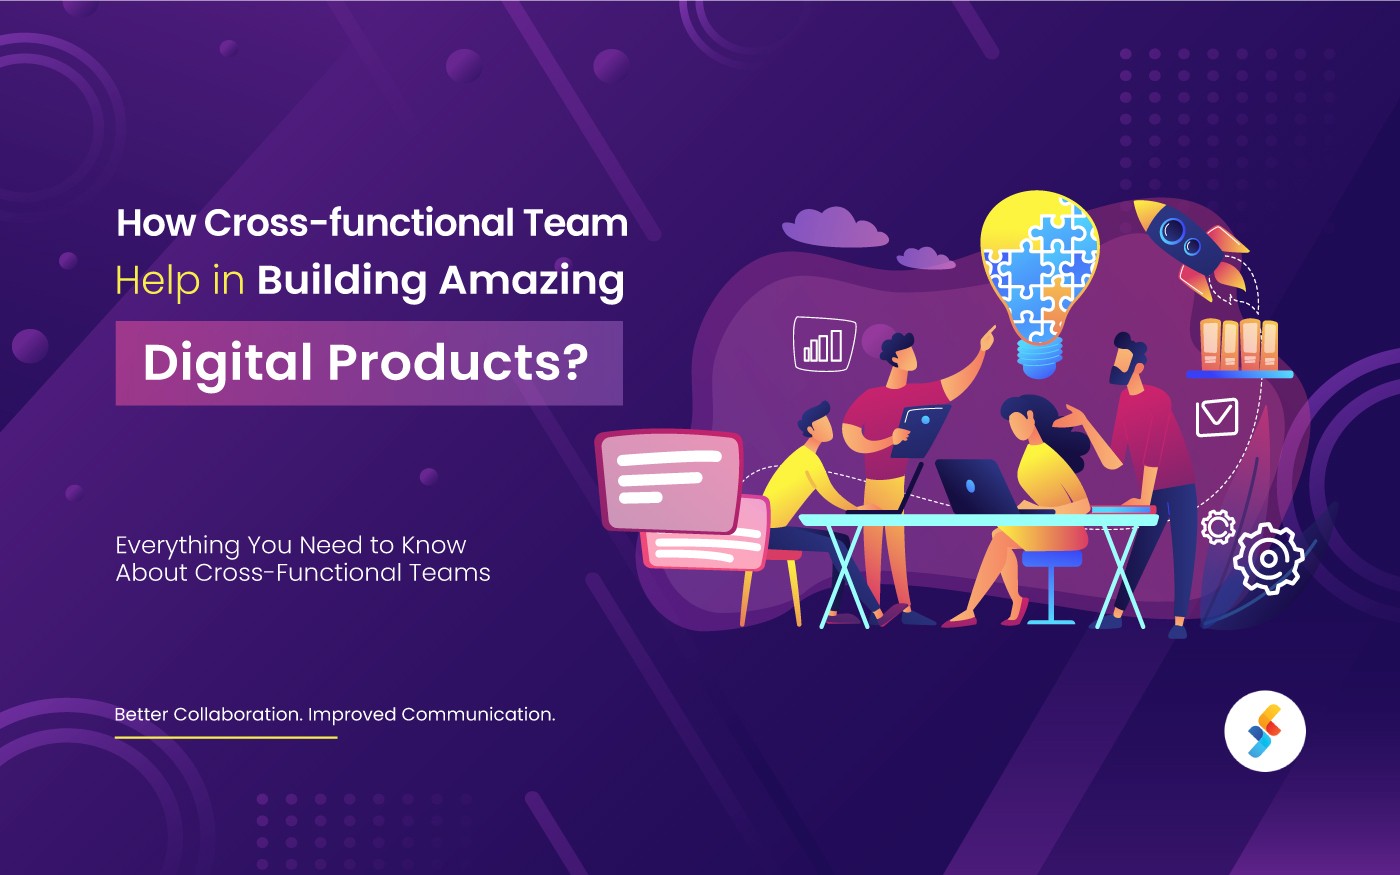 How Cross-functional Teams Help in Building Amazing Digital Products?